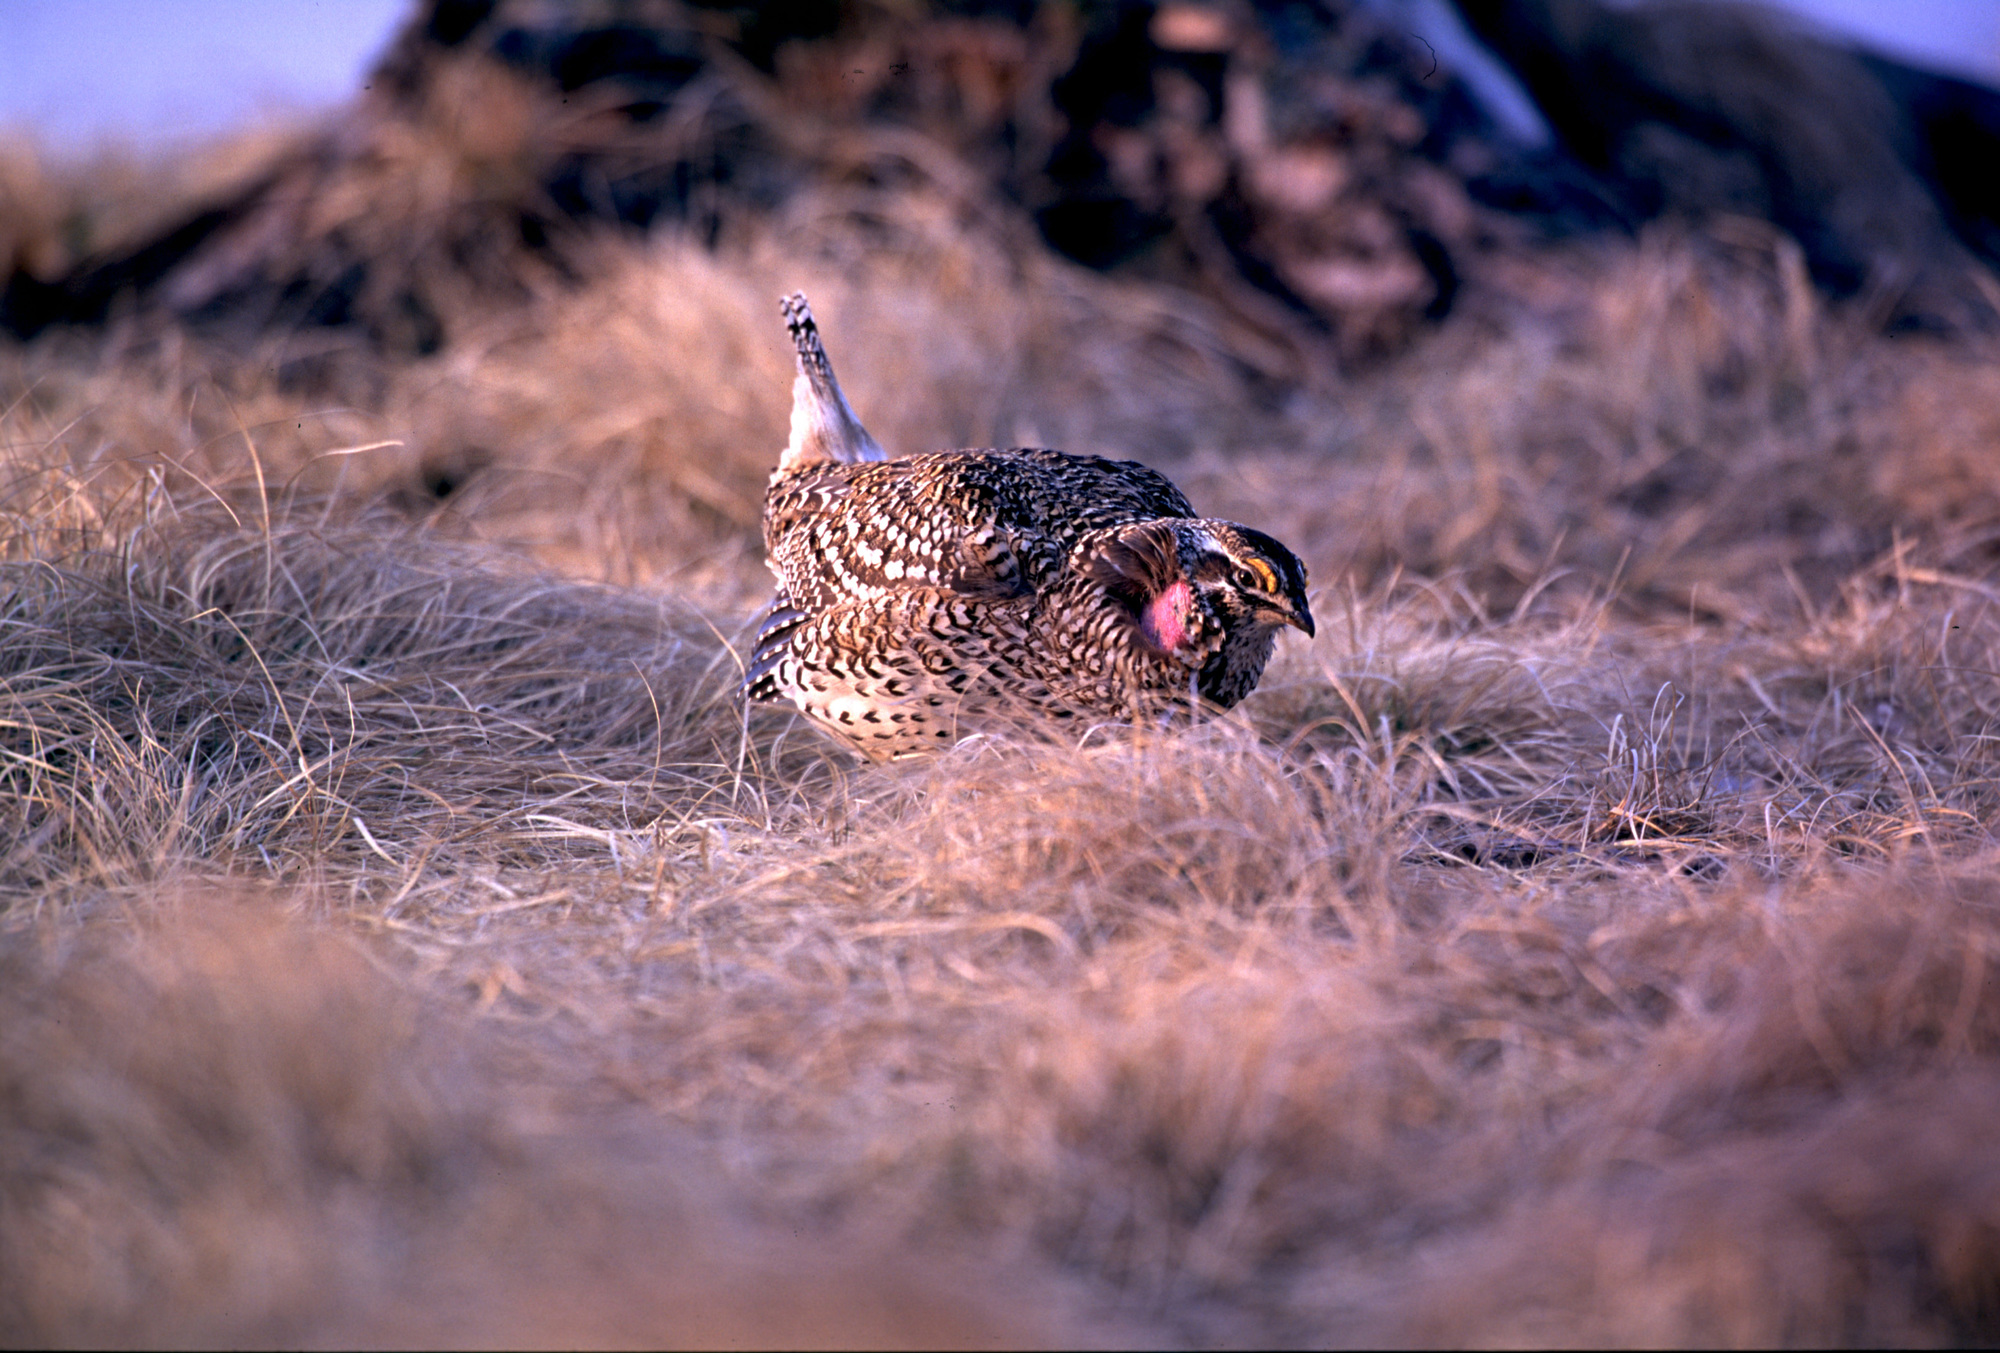 Sharp-tailed grouse are found in greatest concentrations in the Upper Peninsula in Chippewa and Schoolcraft counties.